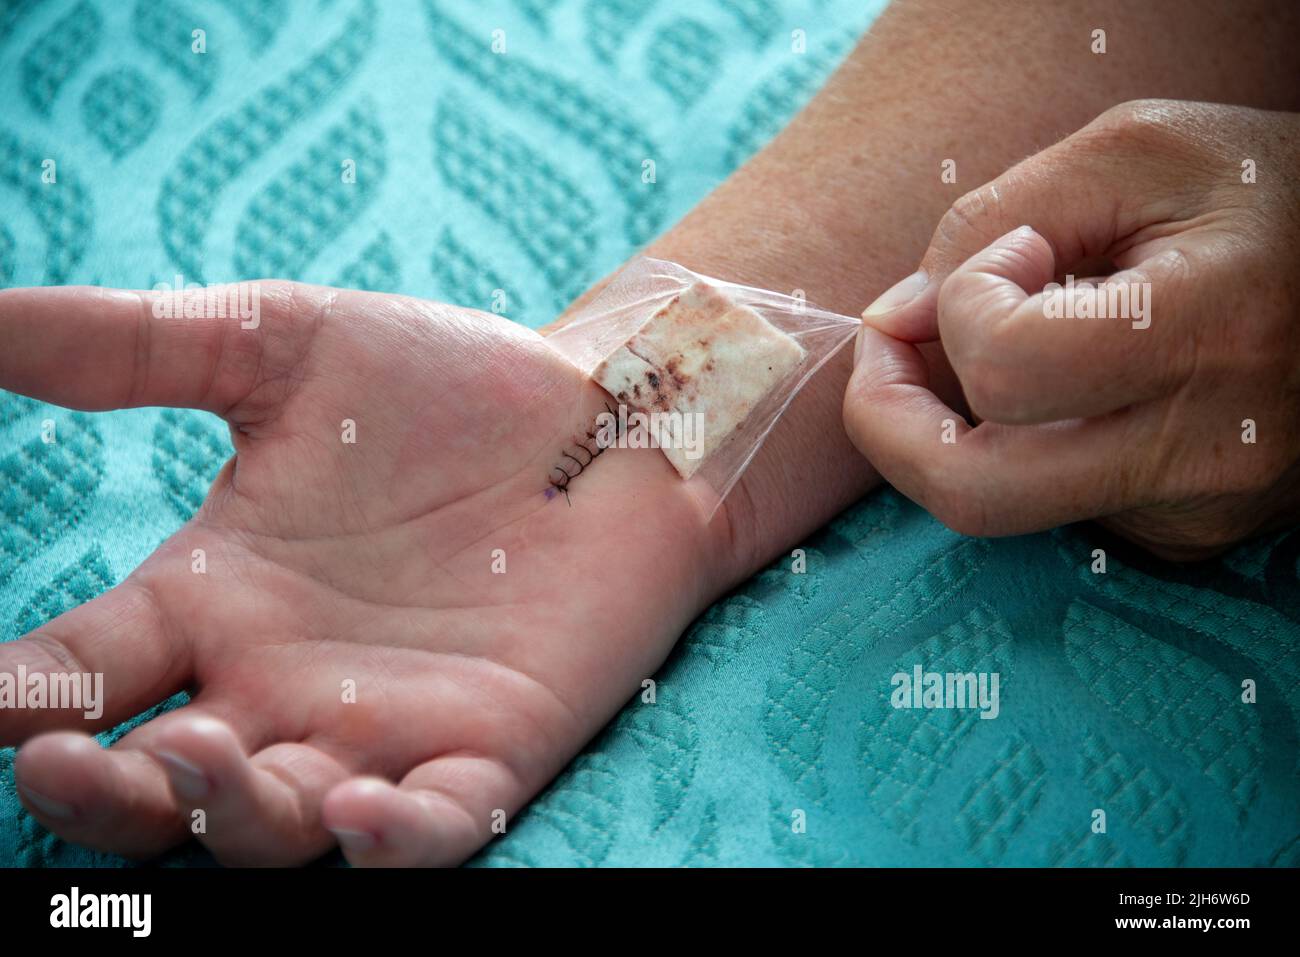 A female nurse removes a padded bandage on the wrist and hand of a woman. The palm has a number of black nylon stitches from carpal tunnel surgery. Stock Photo